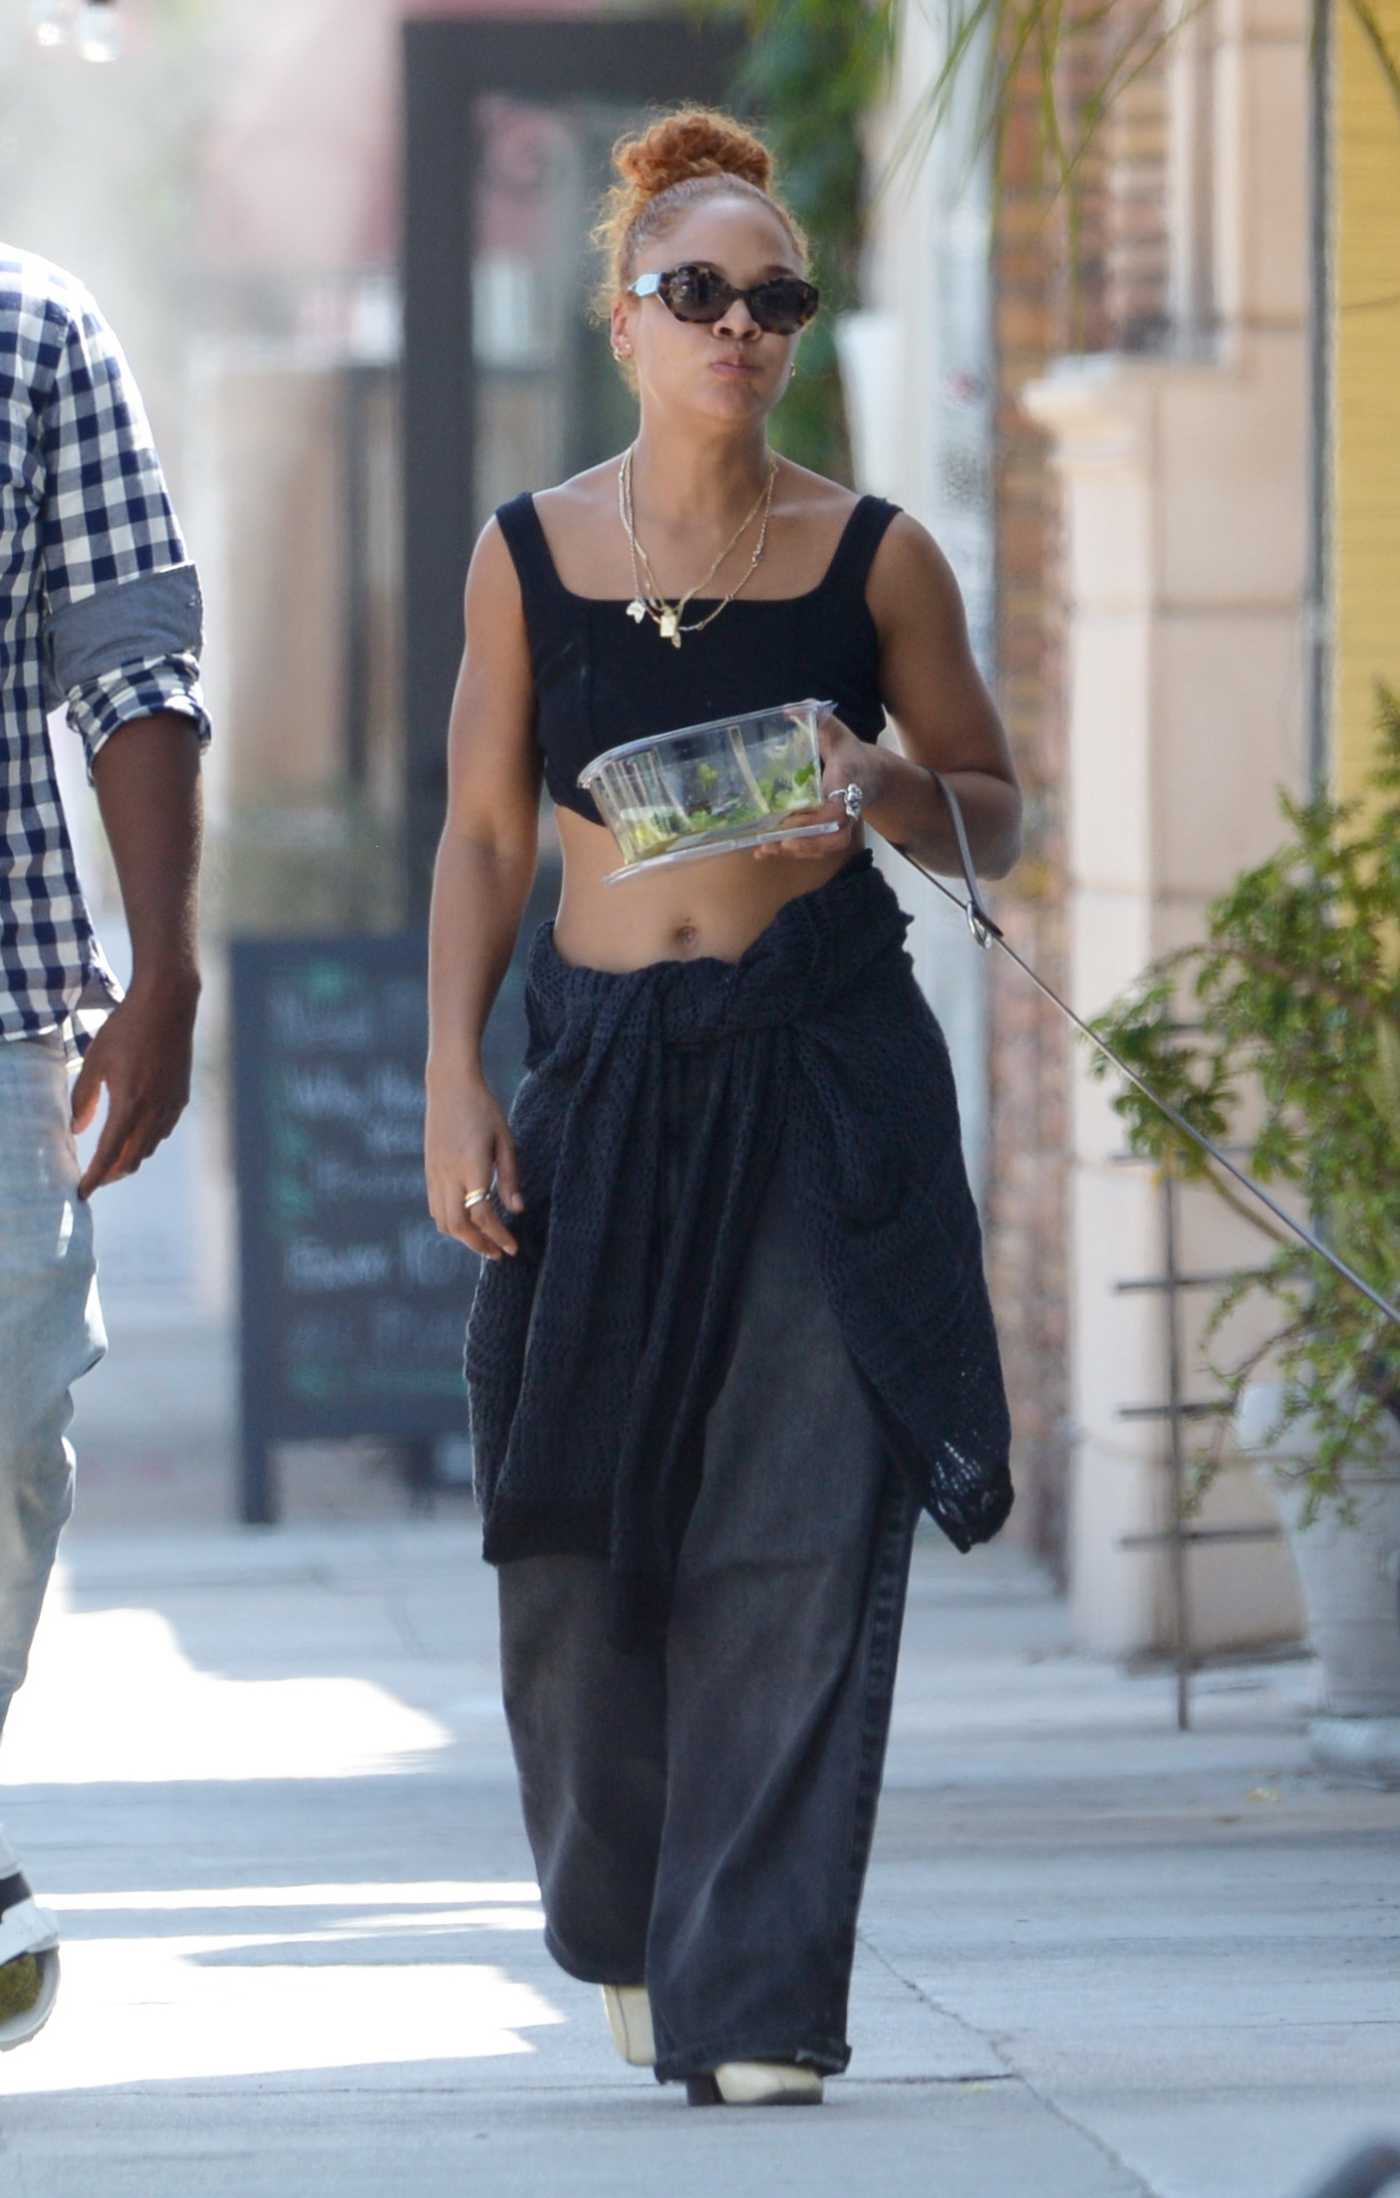 Tessa Thompson in a Black Top Goes Shopping for Home Goods in Los Angeles 08/18/2022